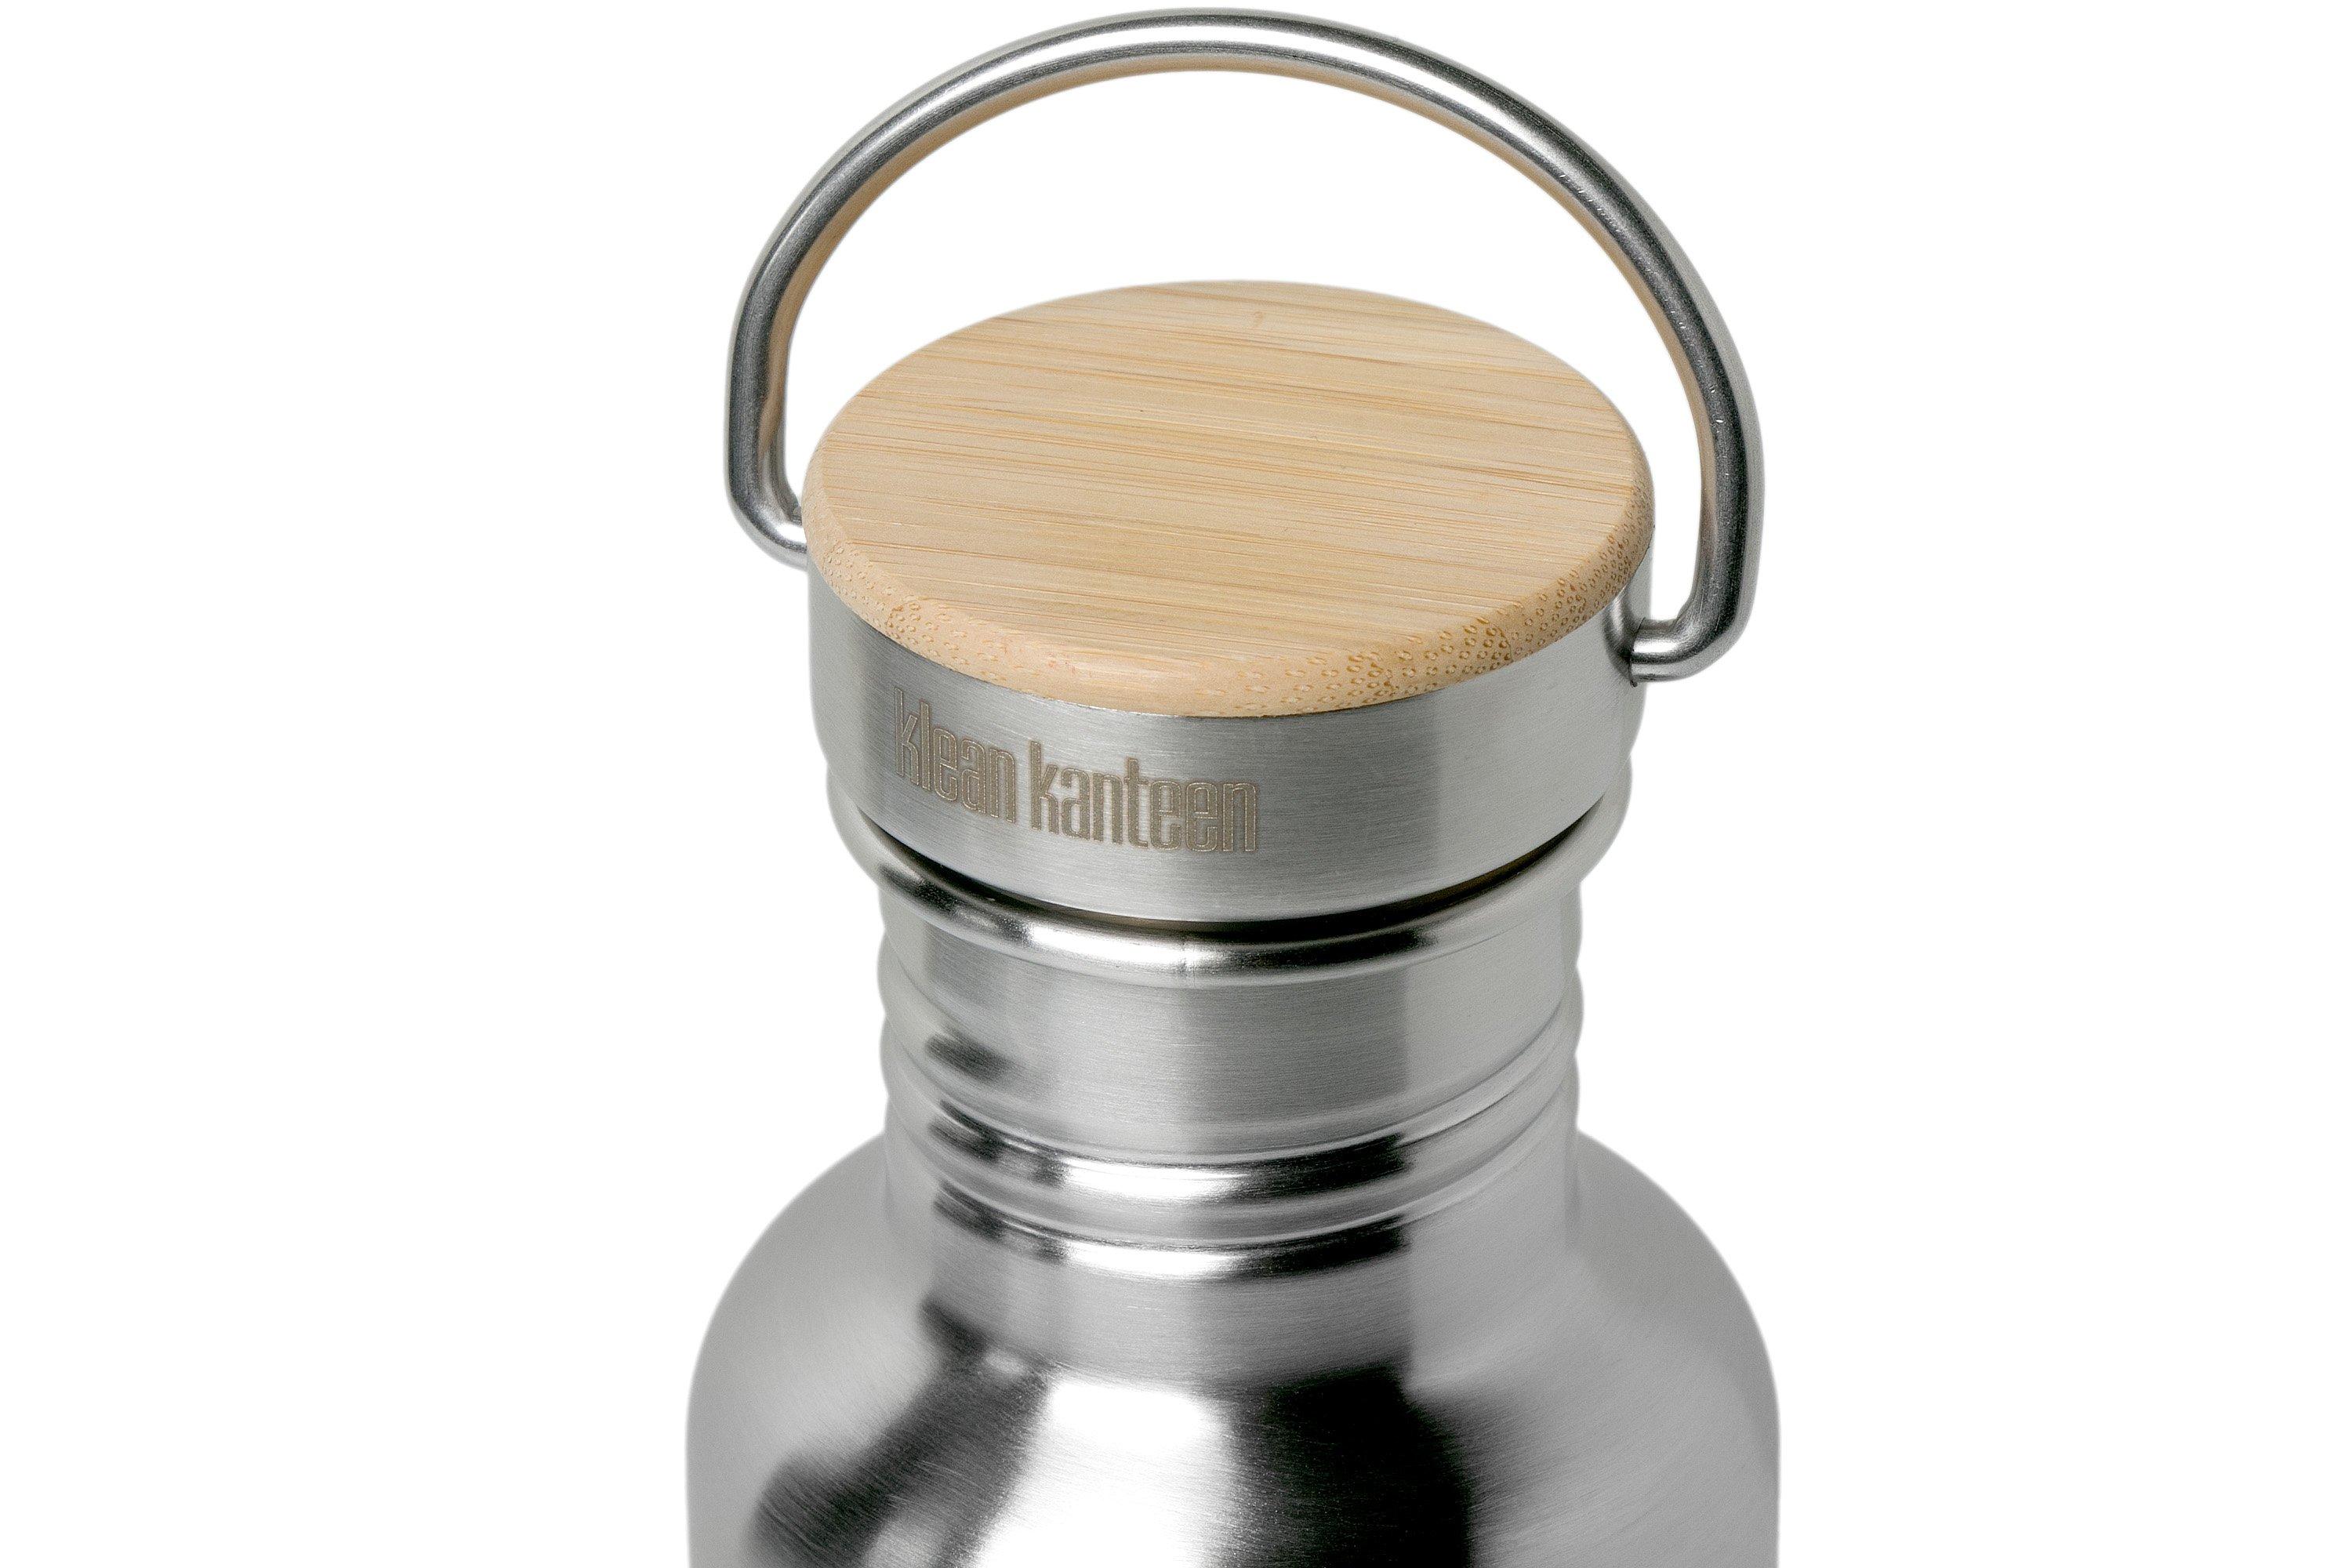 Klean Kanteen Reflect 27 oz. Bottle with Bamboo Cap - Brushed Stainless